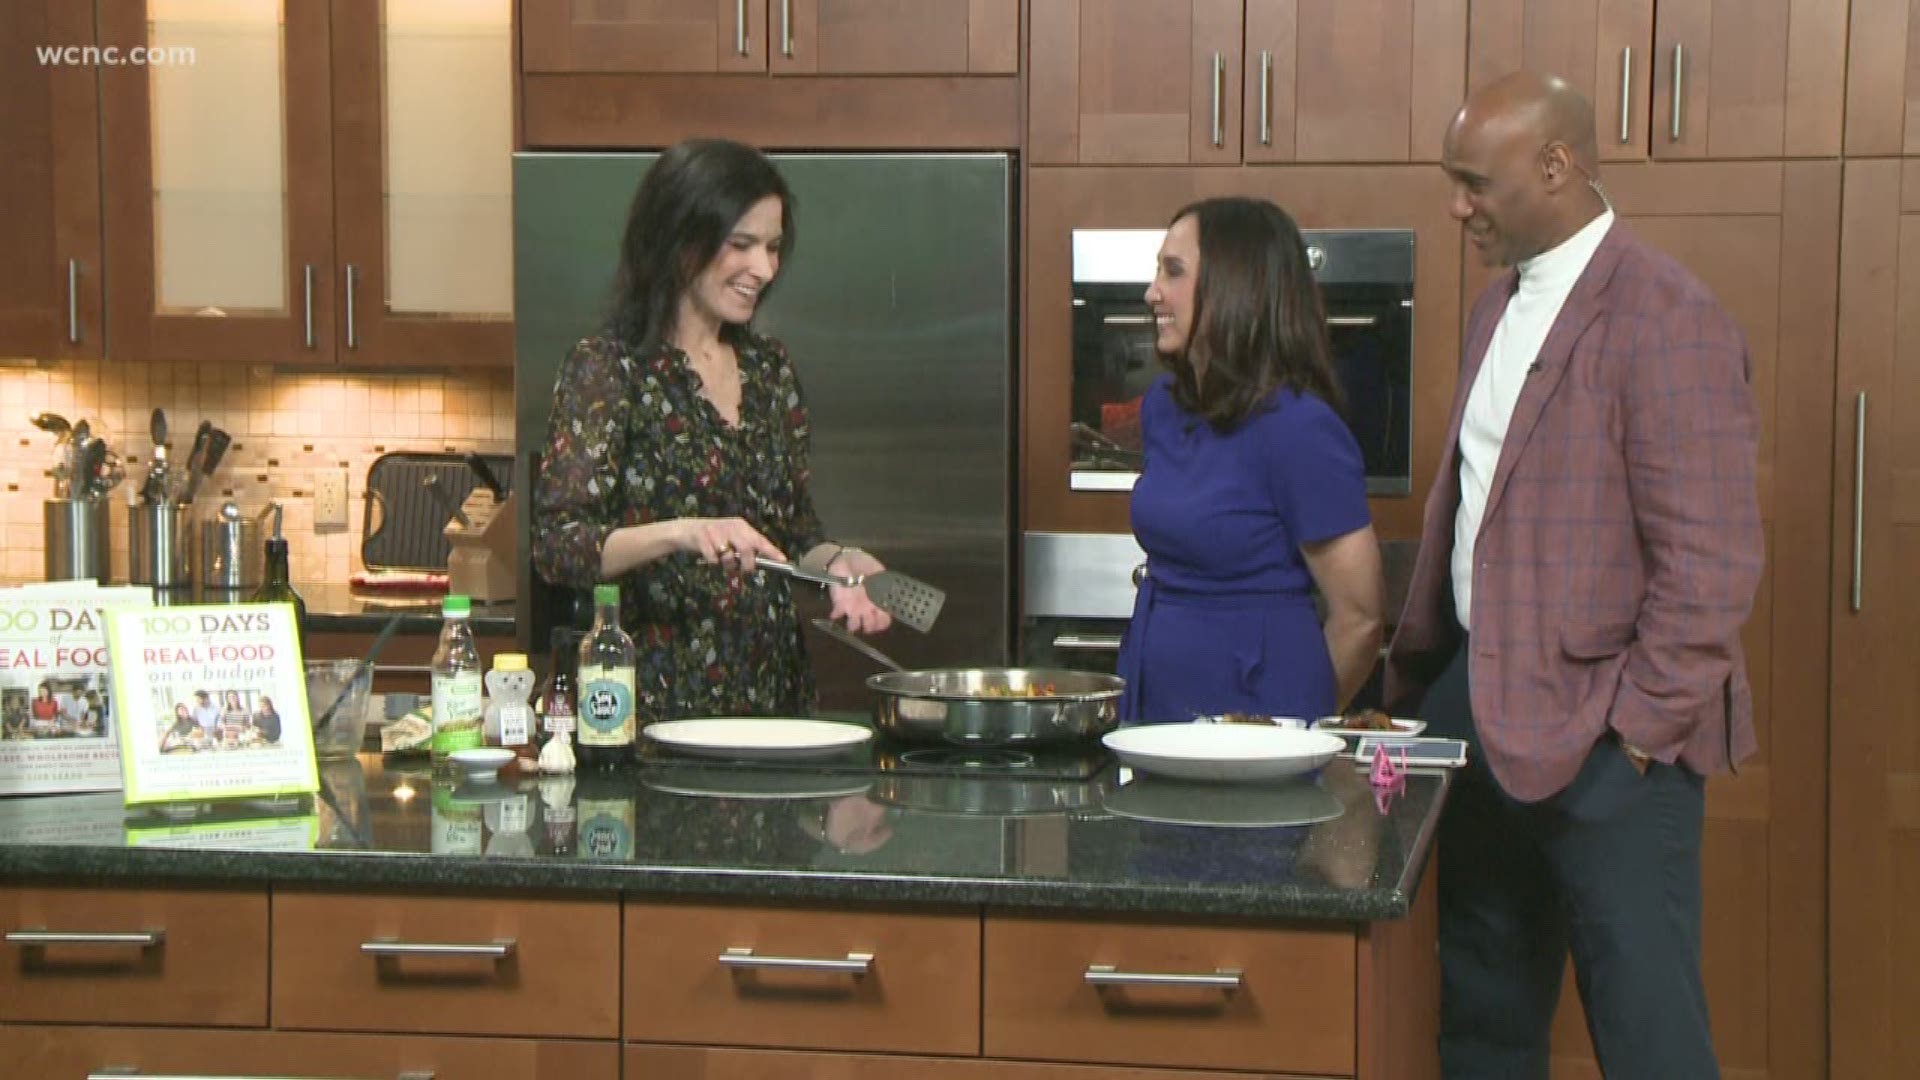 Cookbook author Lisa Leake makes a healthy, delicious and easy dinner recipe.